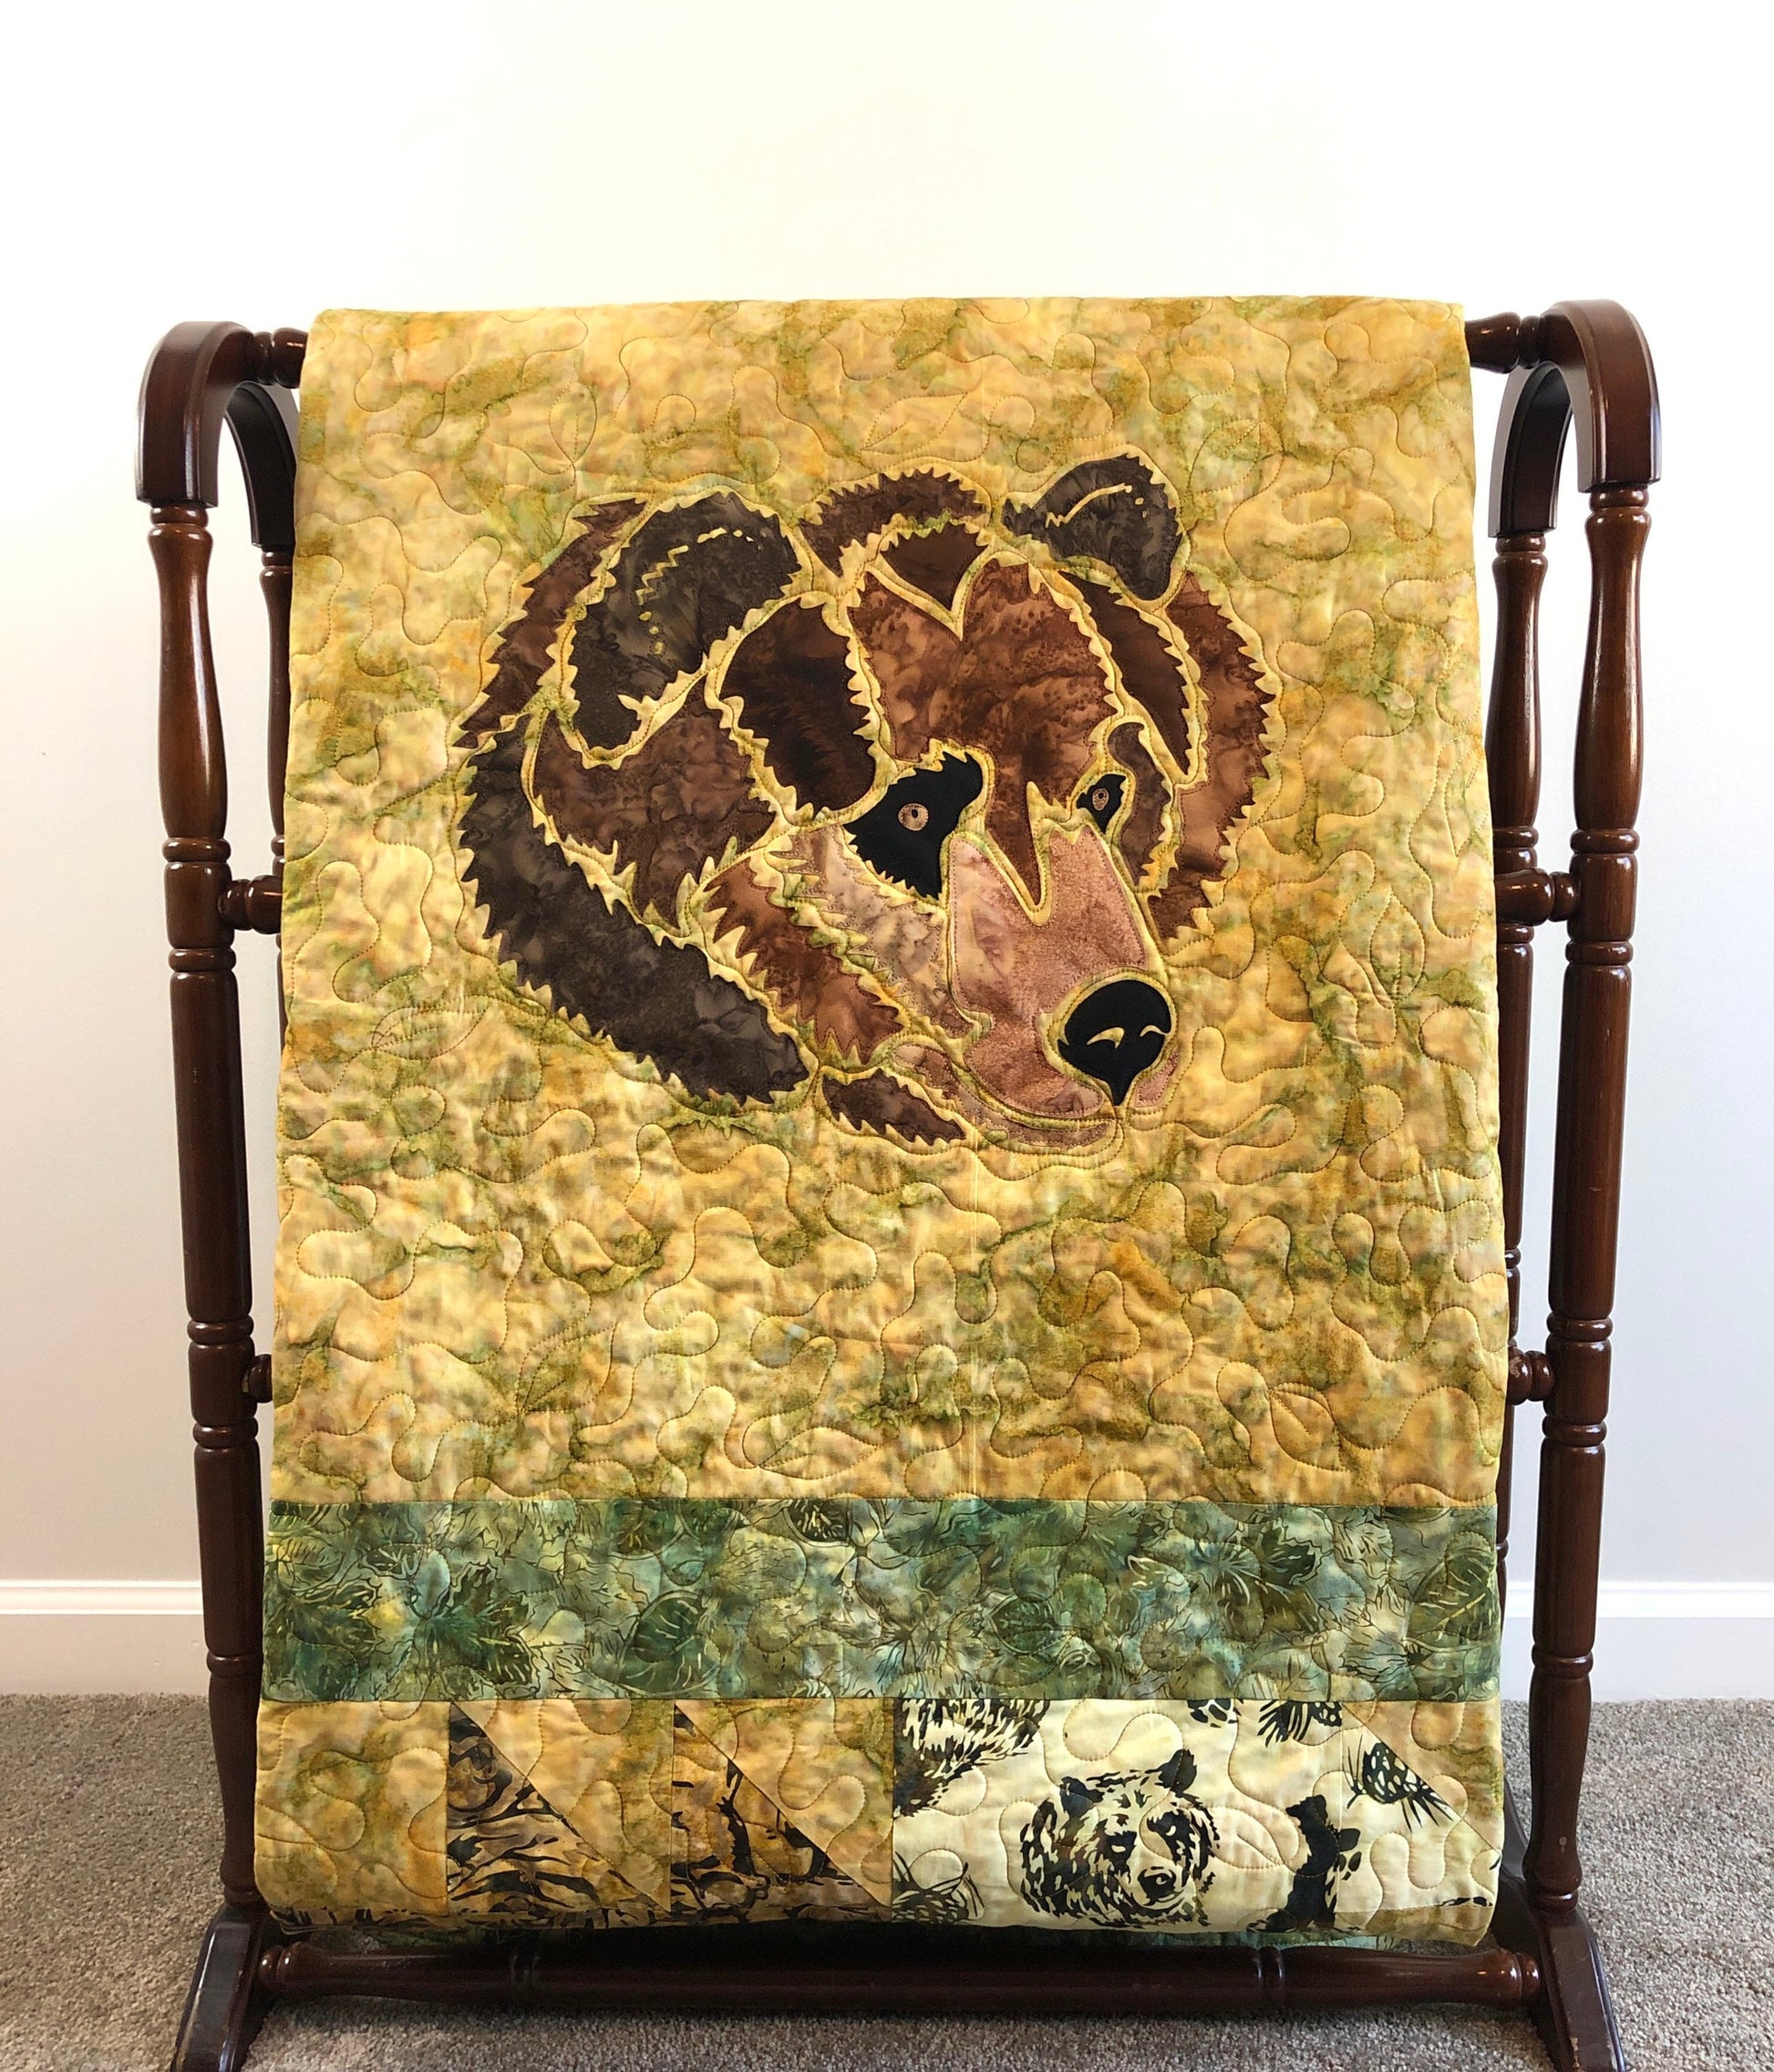 Golden Bear Quilt, Gold, Green and Brown, With Appliqué, XL Twin Size